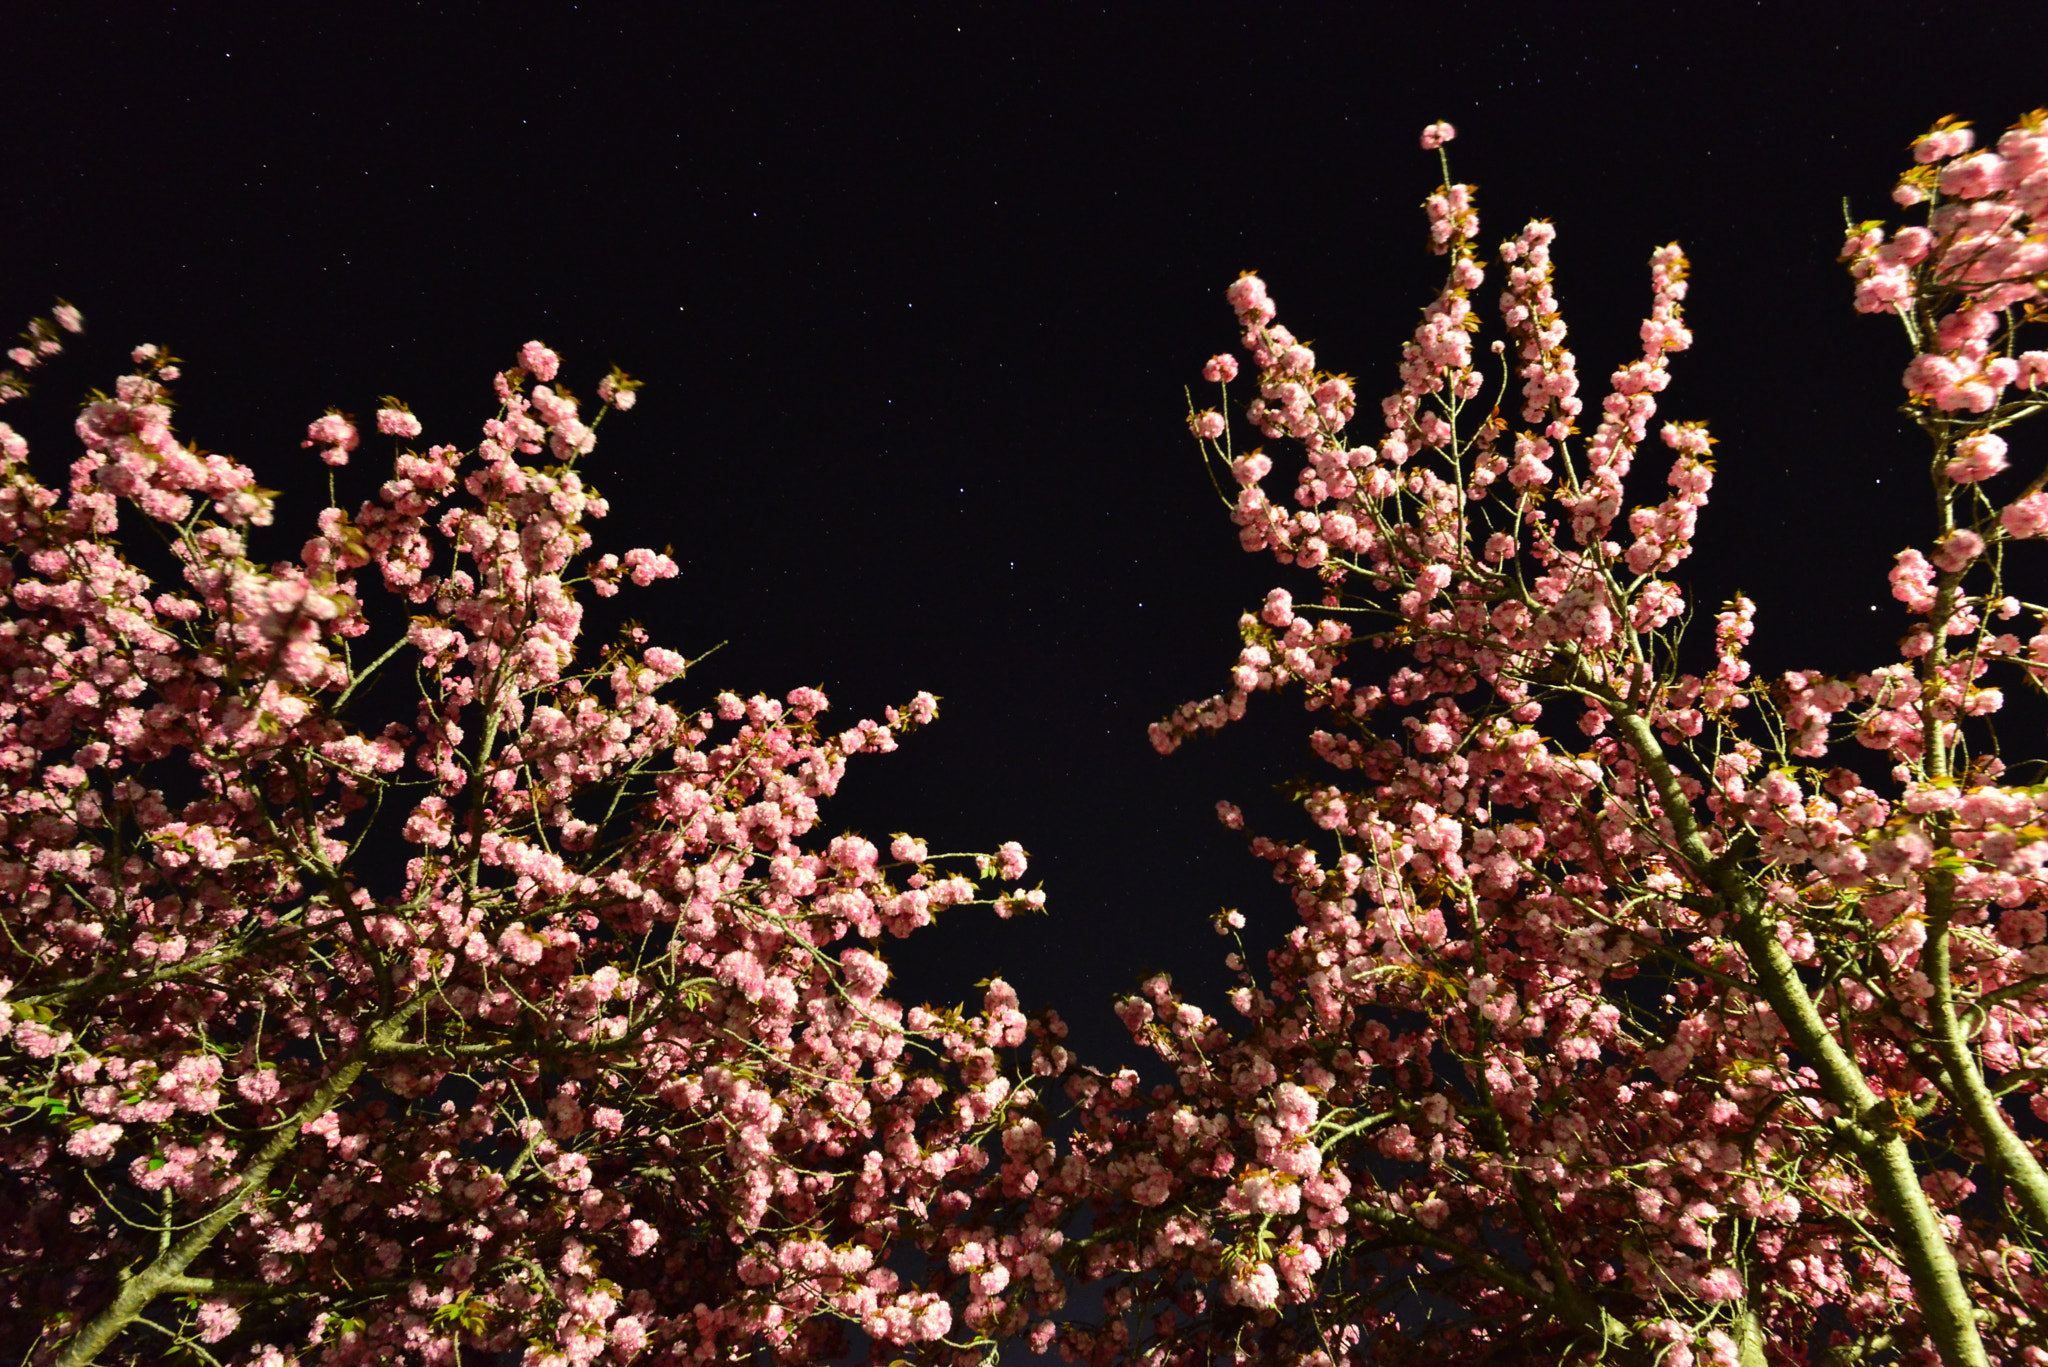 Nikon D800E sample photo. The big dipper and cherry tree photography